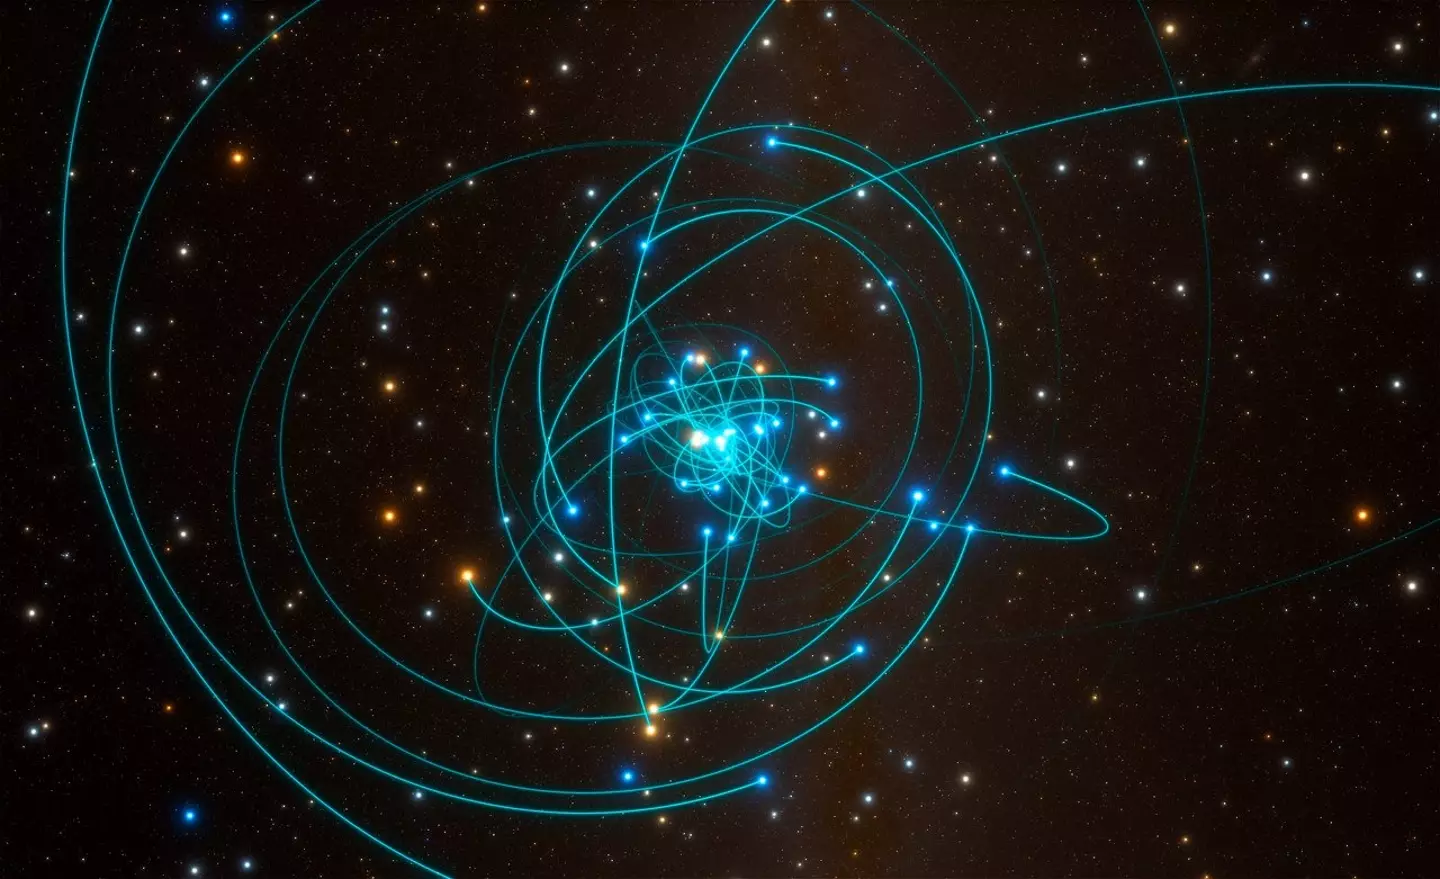 Orbits of stars very close to the supermassive black hole at the heart of the Milky Way (ESO/L. Calçada/spaceengine.org)